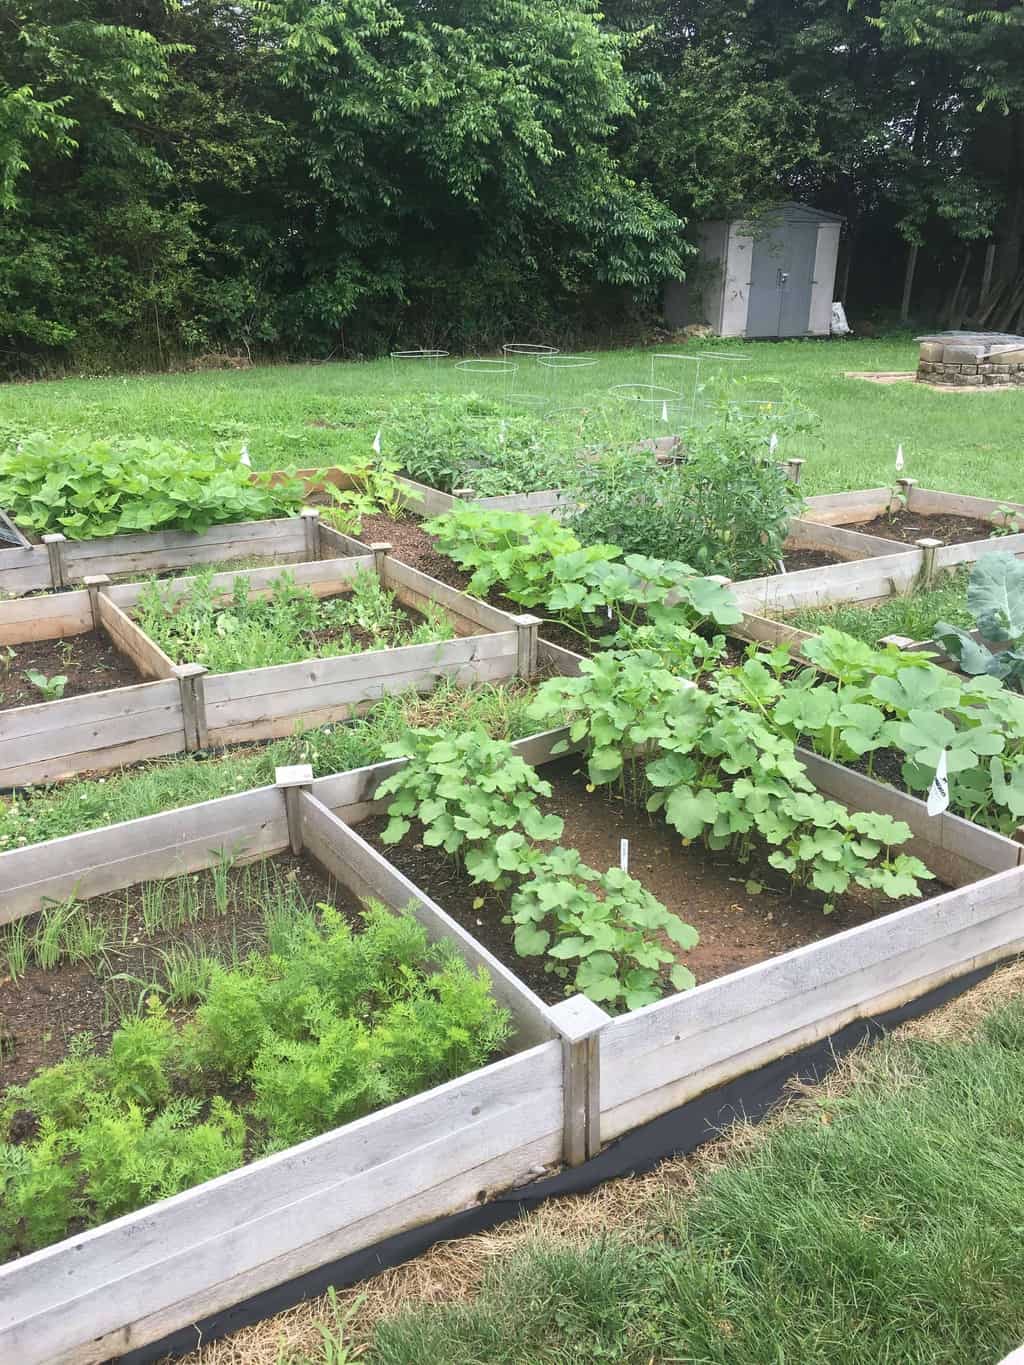 Save Money on Produce by Planting a Garden!